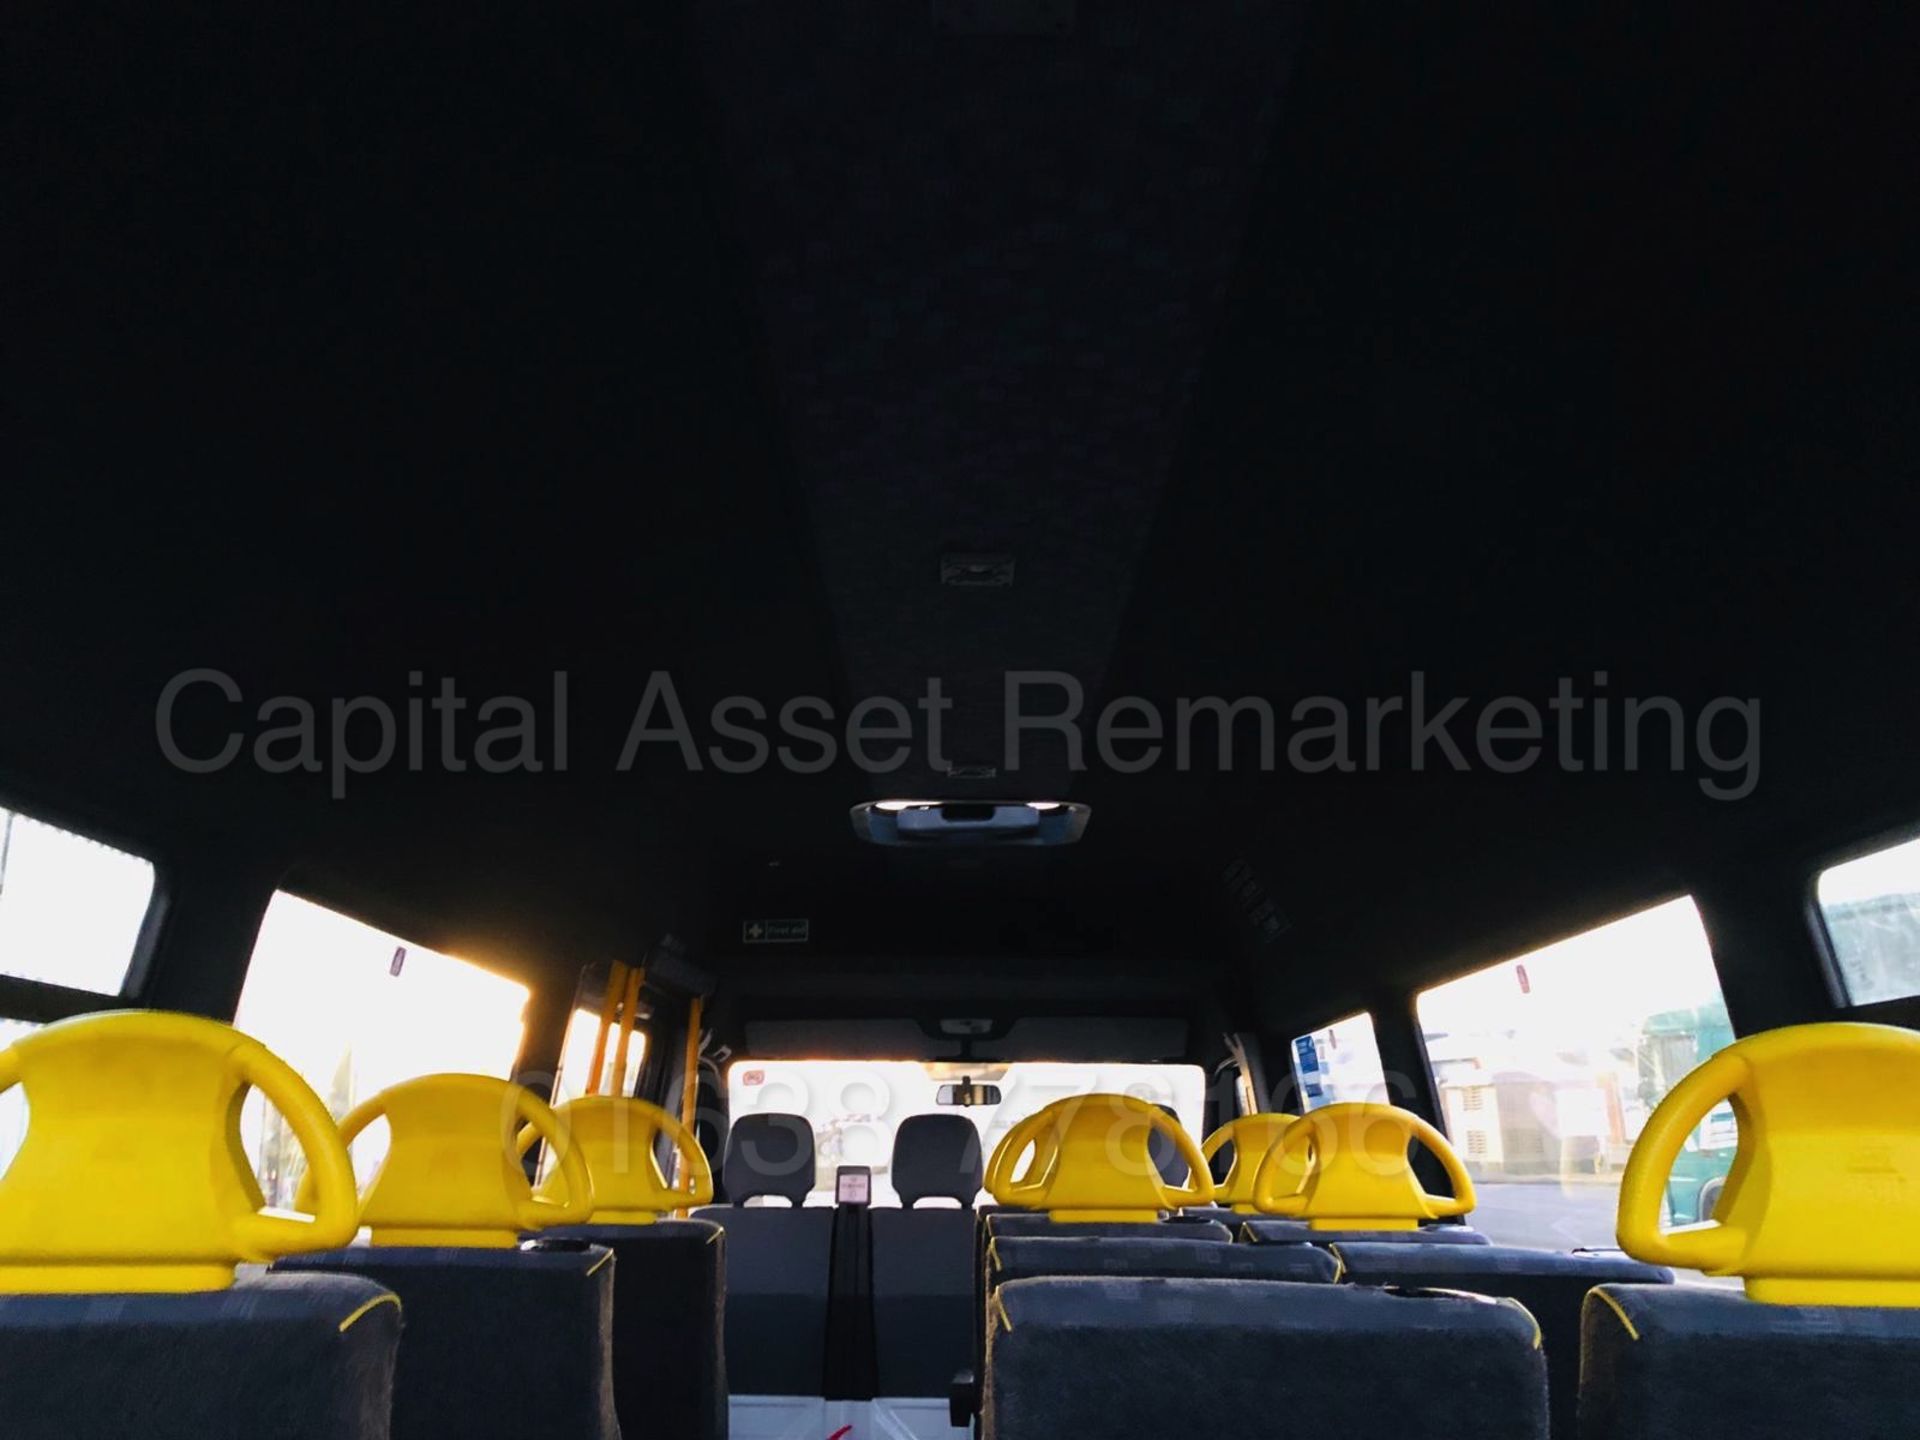 MERCEDES SPRINTER 411 CDI *LWB - 16 SEATER MINI-BUS* (2006) 'QUICK RELEASE SEATS - WHEEL CHAIR LIFT* - Image 13 of 24